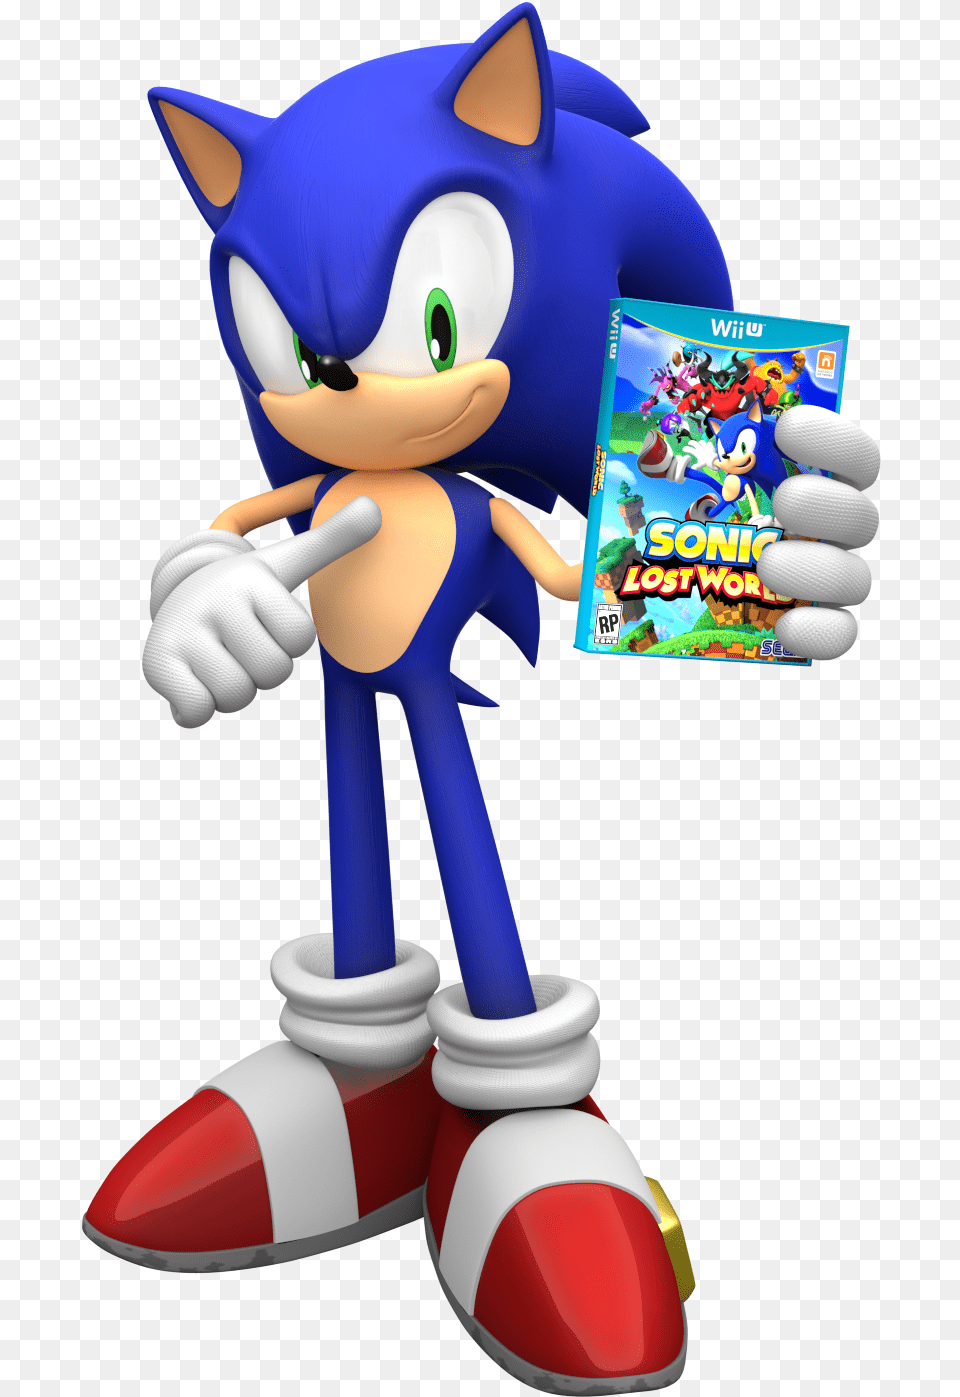 Sonic Lost World Wii U Game Disney Infinity Sonic The Hedgehog, Toy Free Png Download